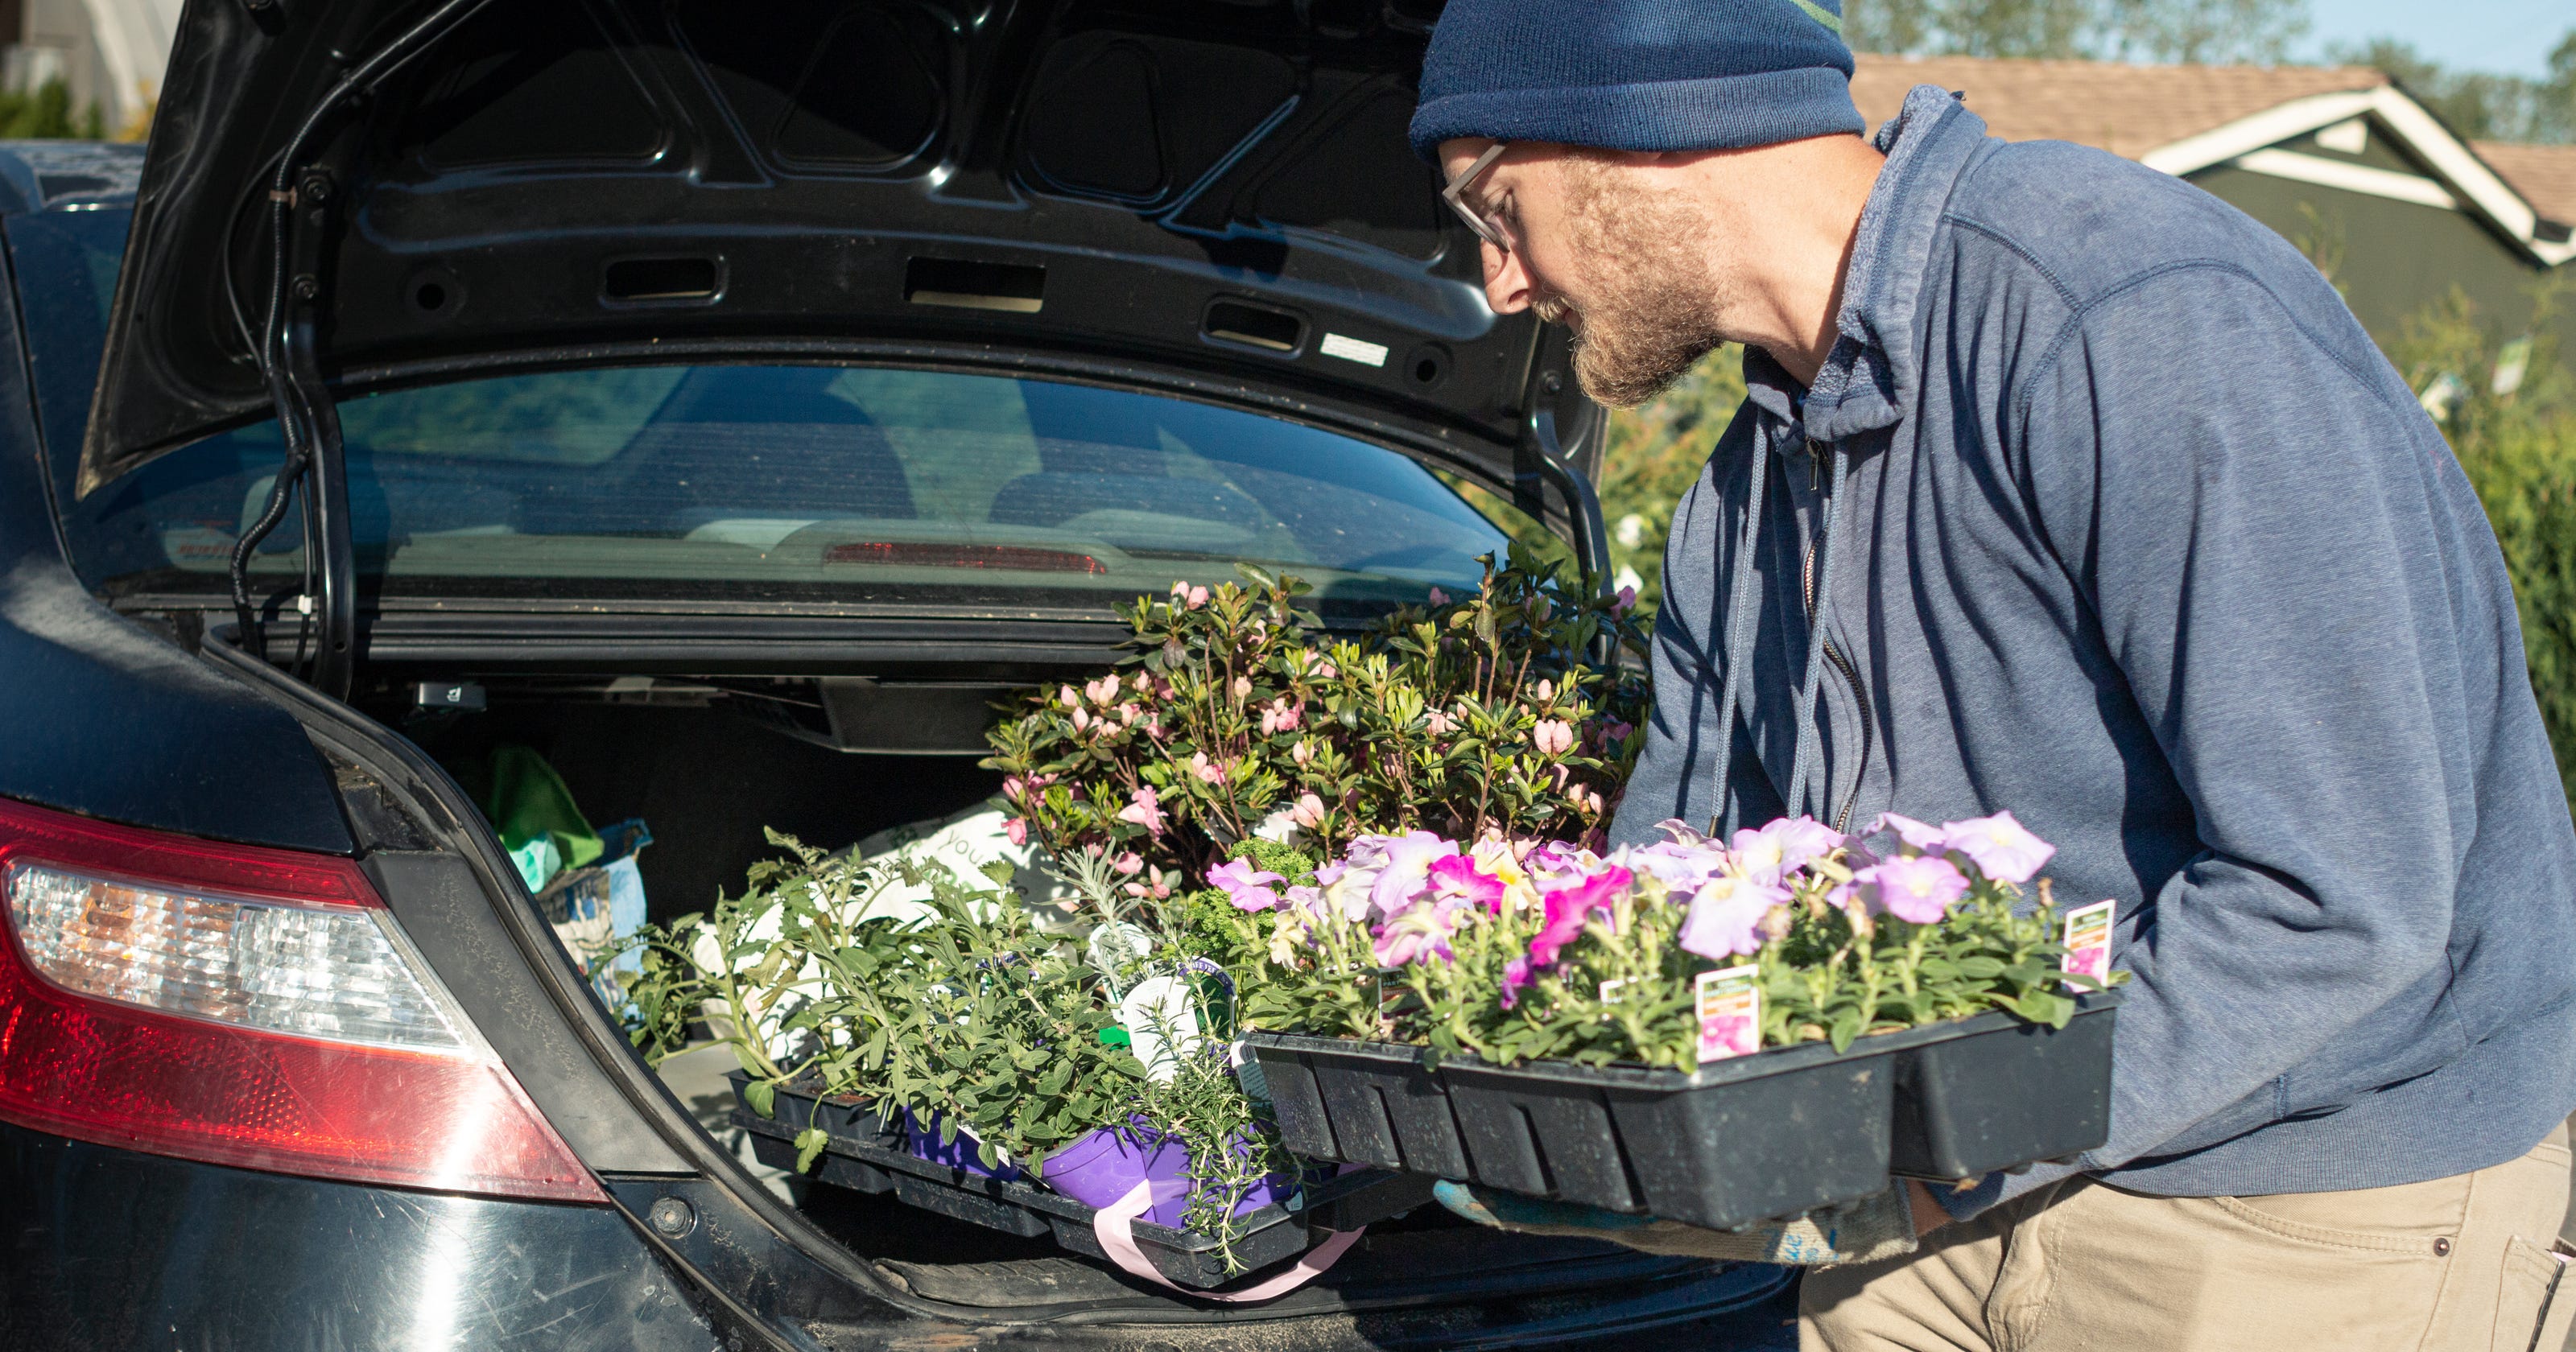 Nashville Area Garden Centers Offer Plant Pickup And Delivery